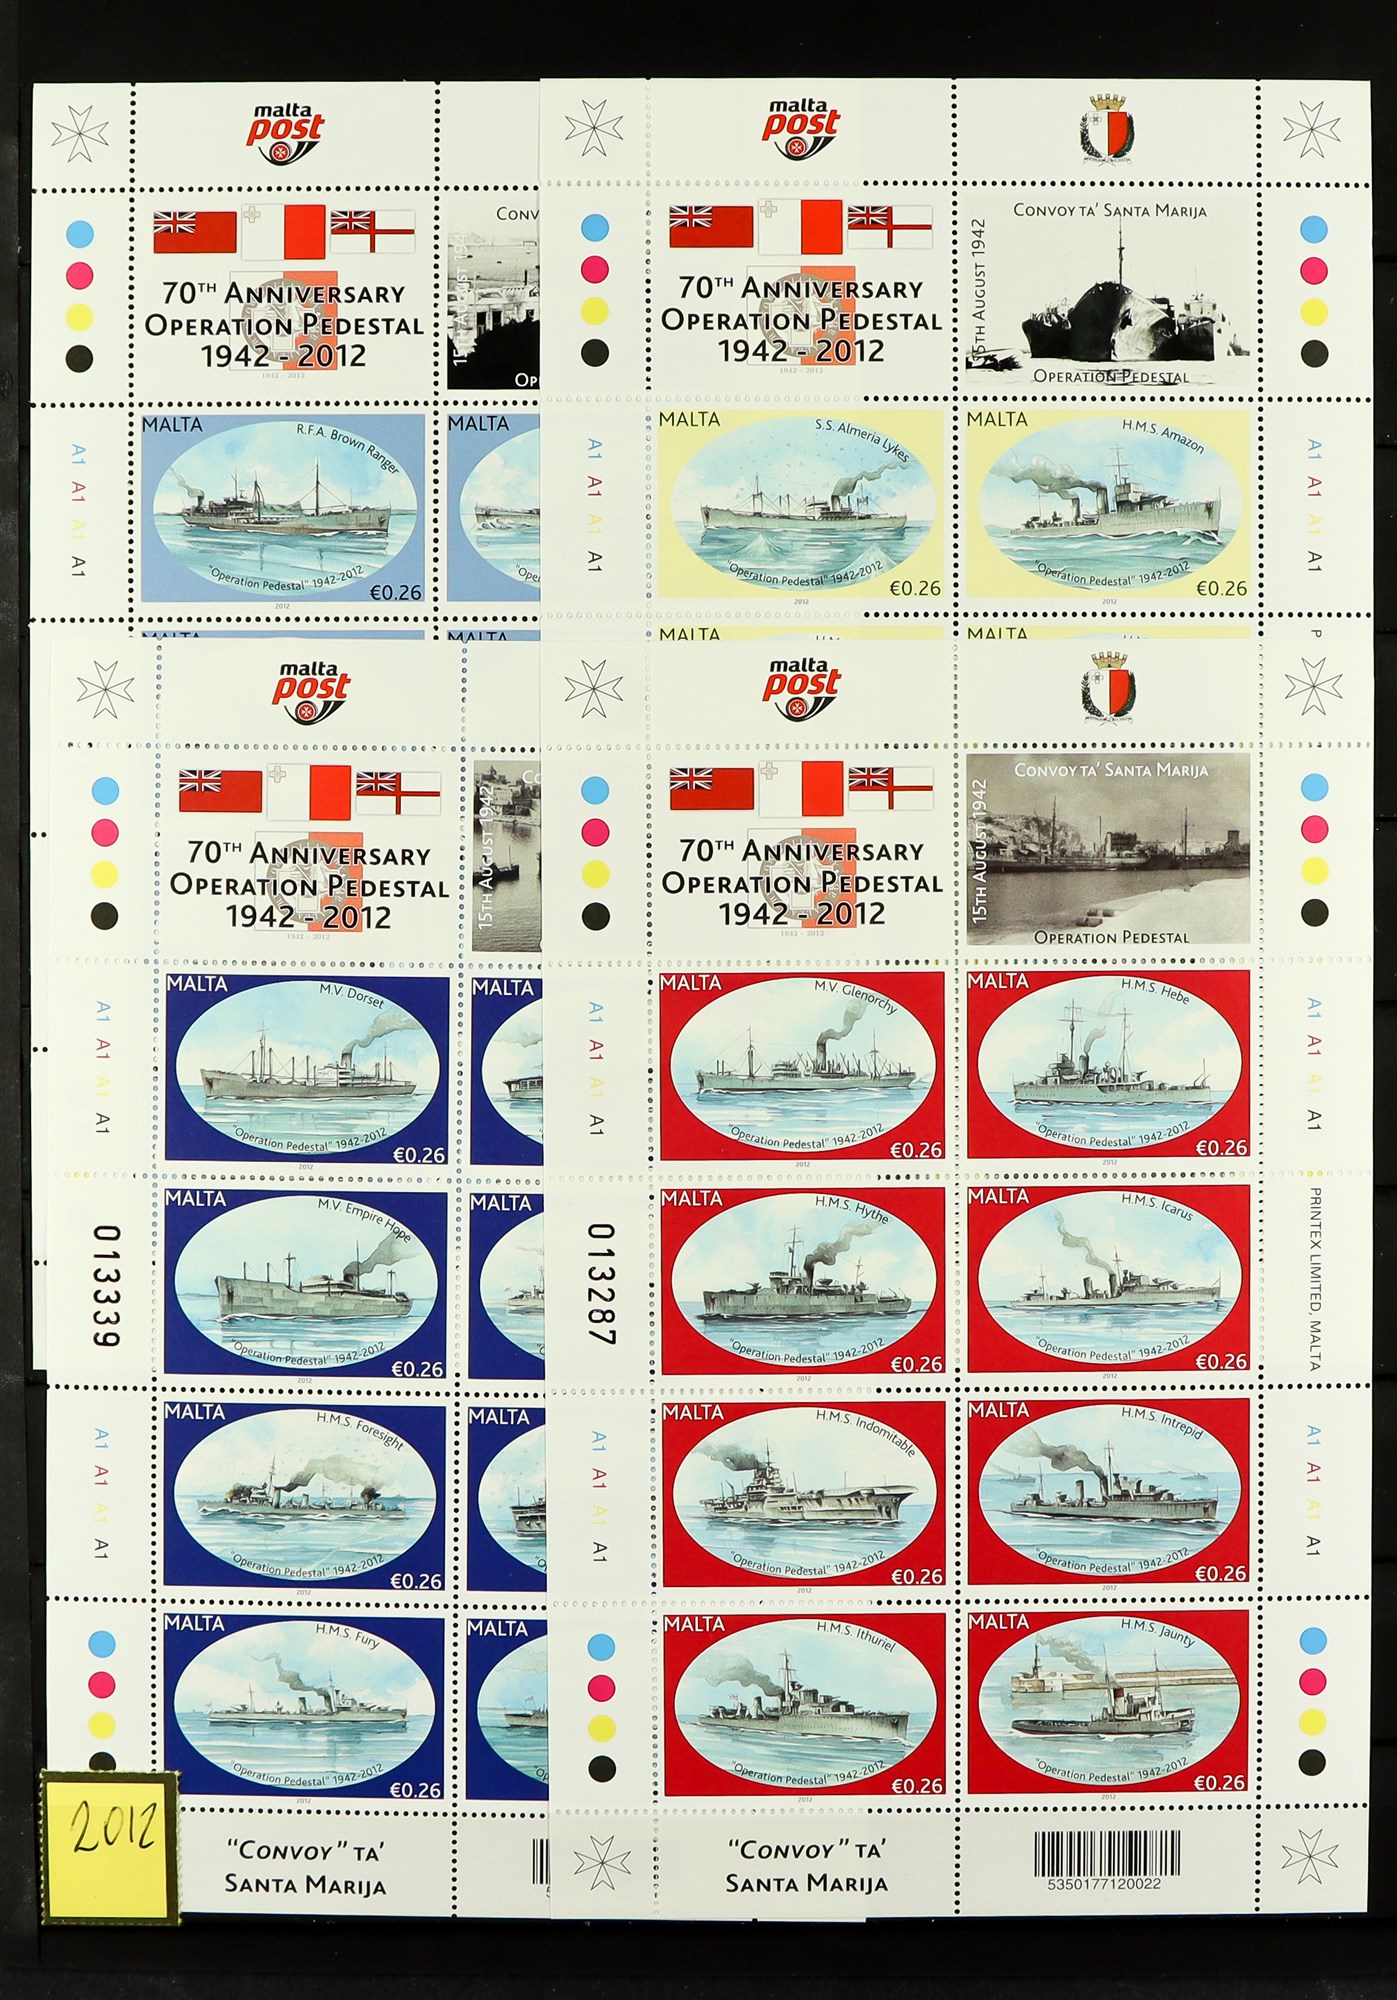 MALTA 1953 - 2013 NEVER HINGED MINT collection in 2 albums, appears complete for sets, miniature - Image 18 of 21